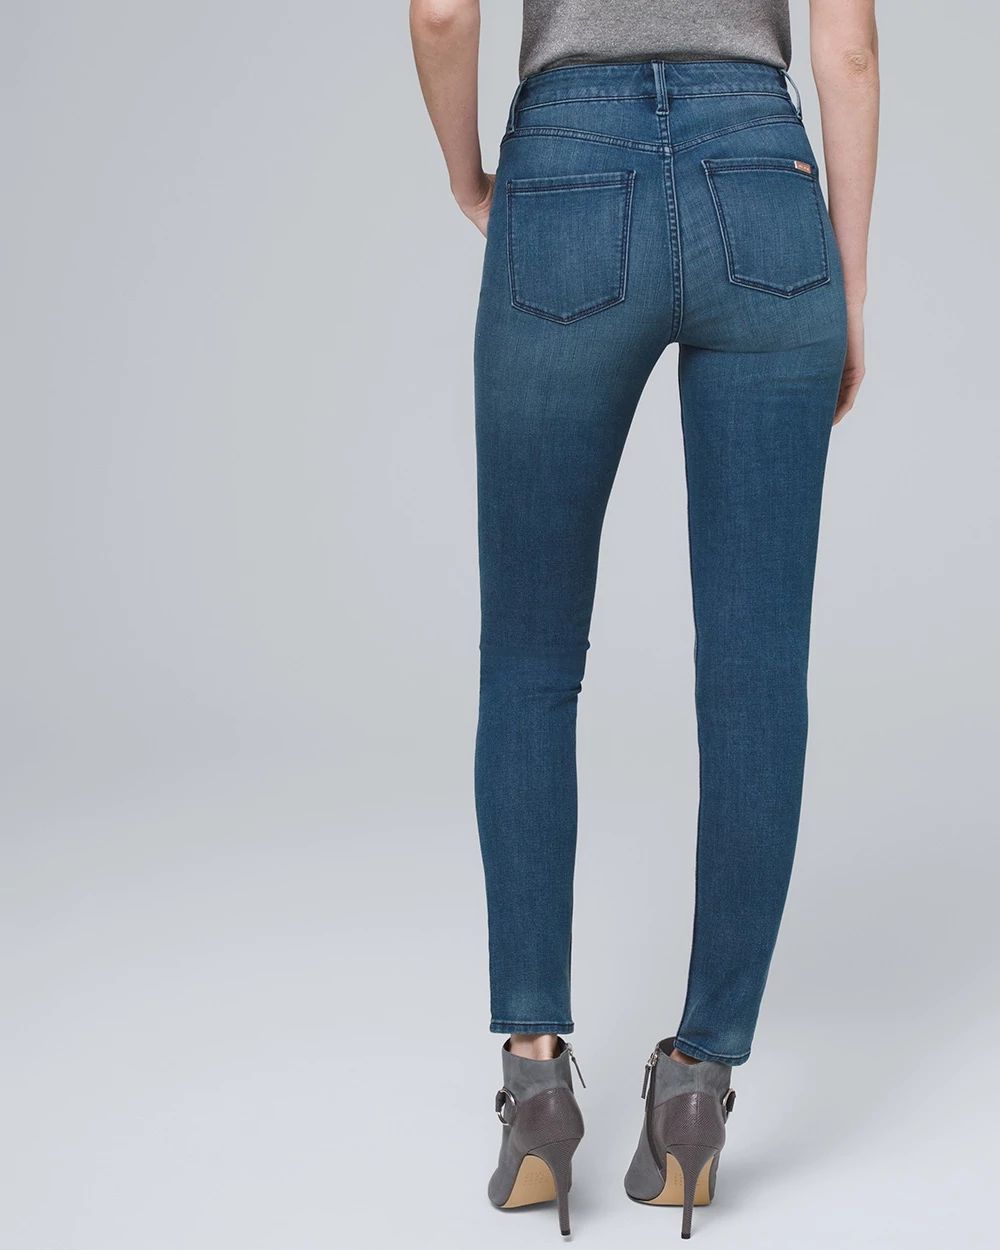 Ultimate Sculpt High-Rise Skinny Ankle Jeans click to view larger image.